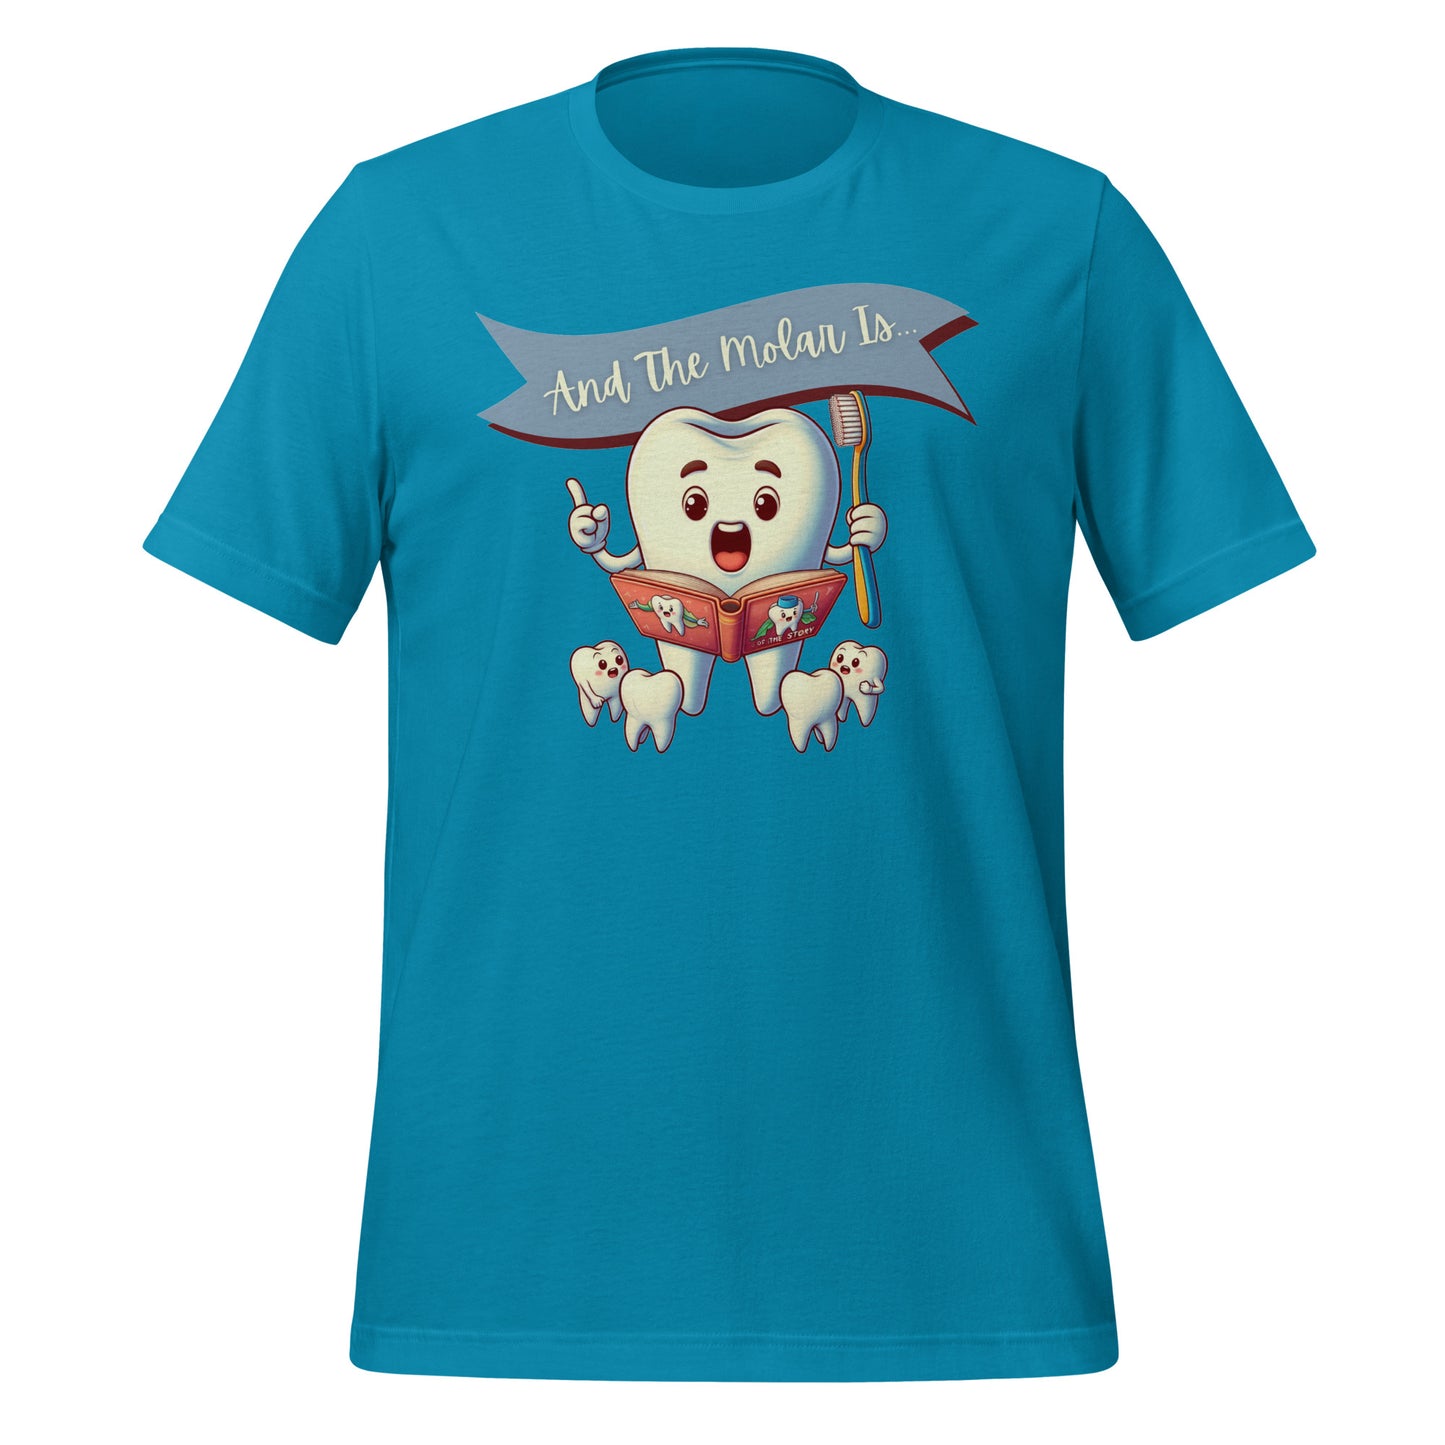 Cute dental shirt featuring a smiling tooth character reading a book with the caption ‘And The Molar Is,’ surrounded by smaller tooth characters. Aqua color.